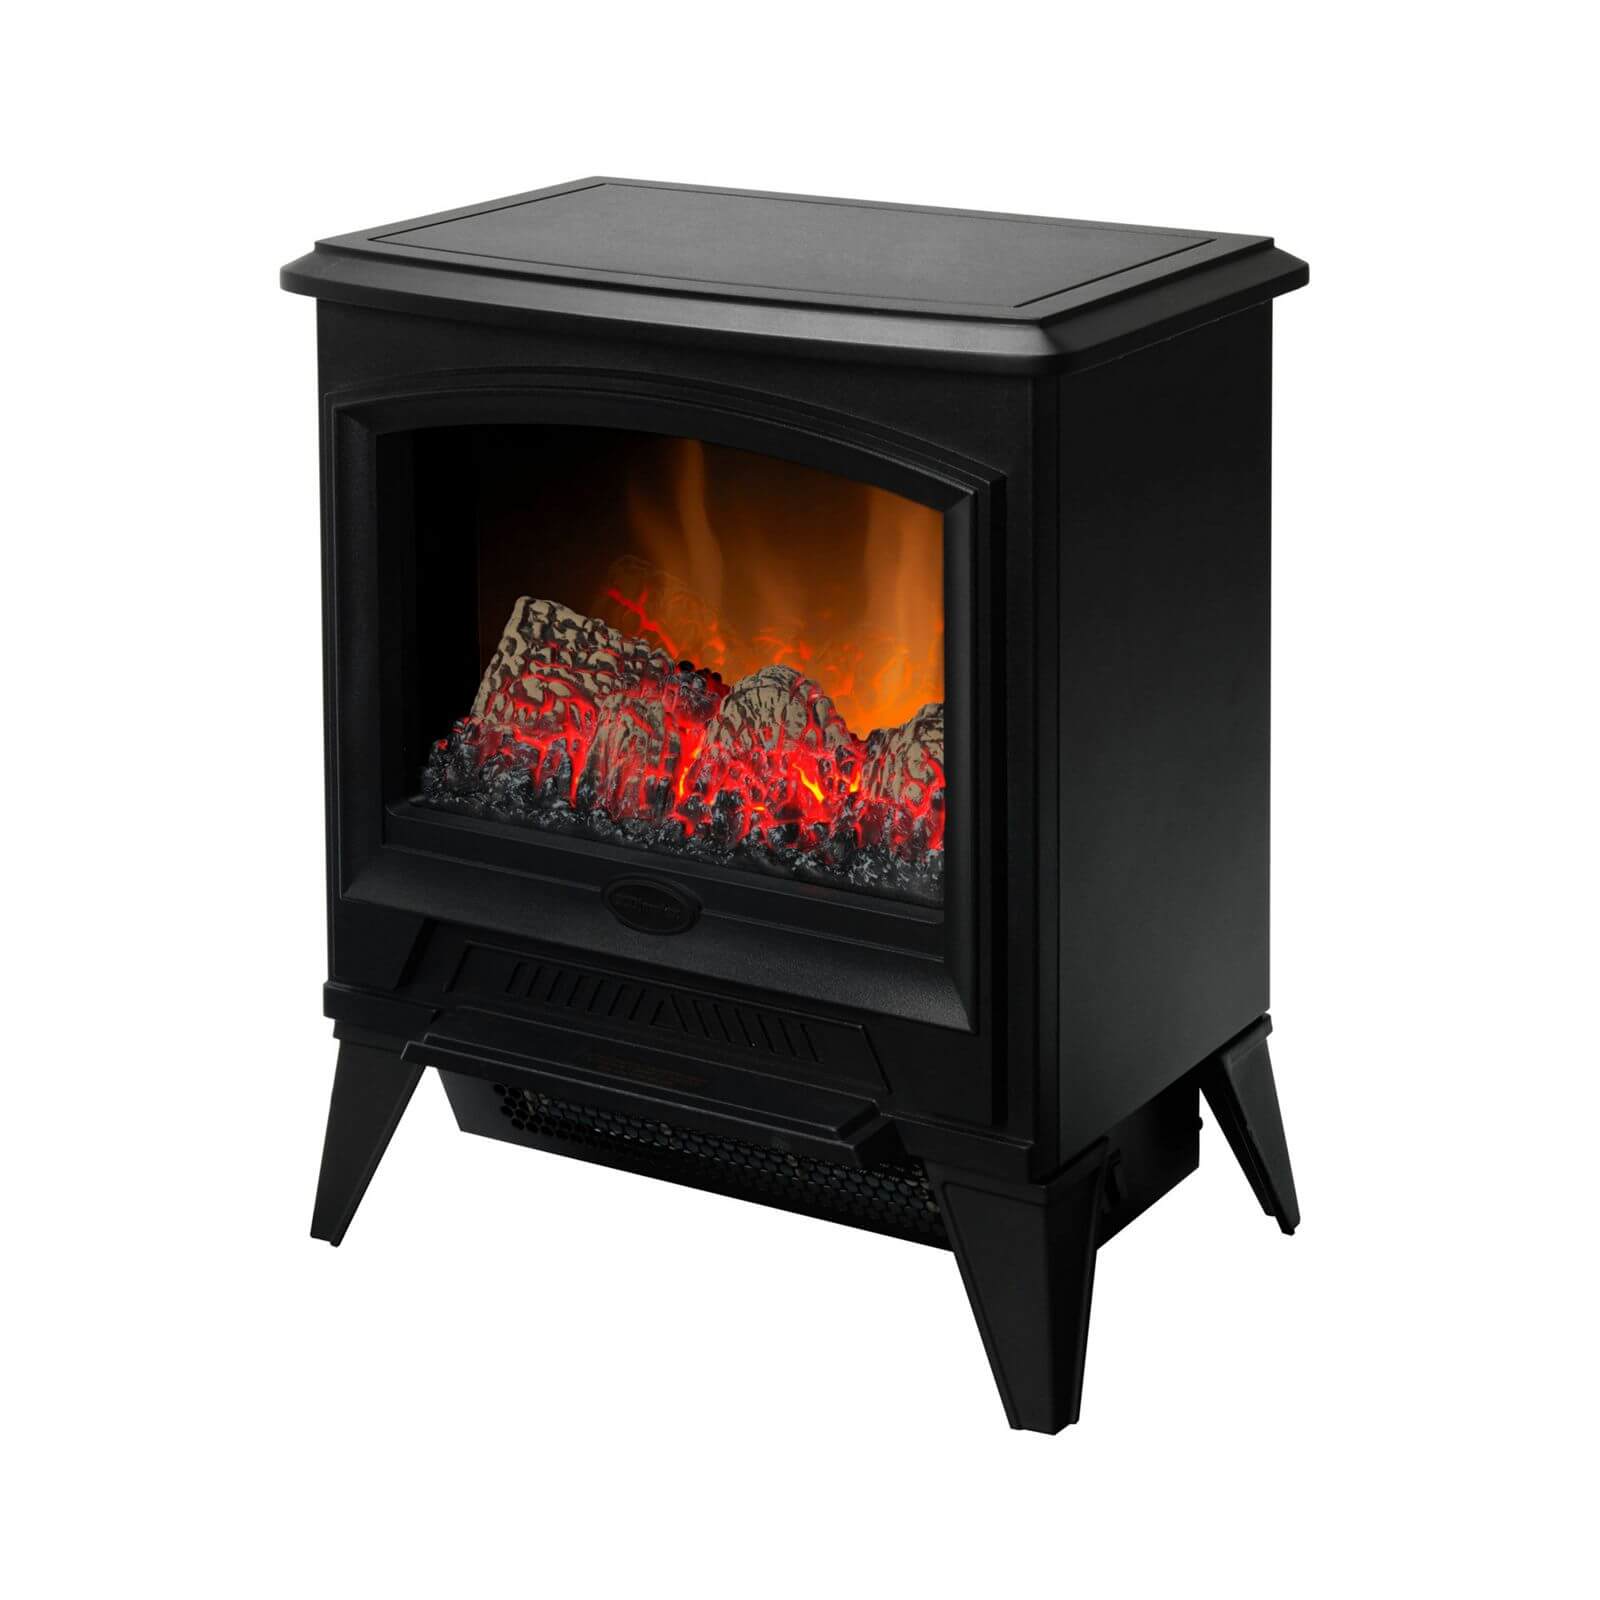 Dimplex Casper Optiflame® 2kW Freestanding Electric Stove with Realistic Log Effect Fuel Bed - Black